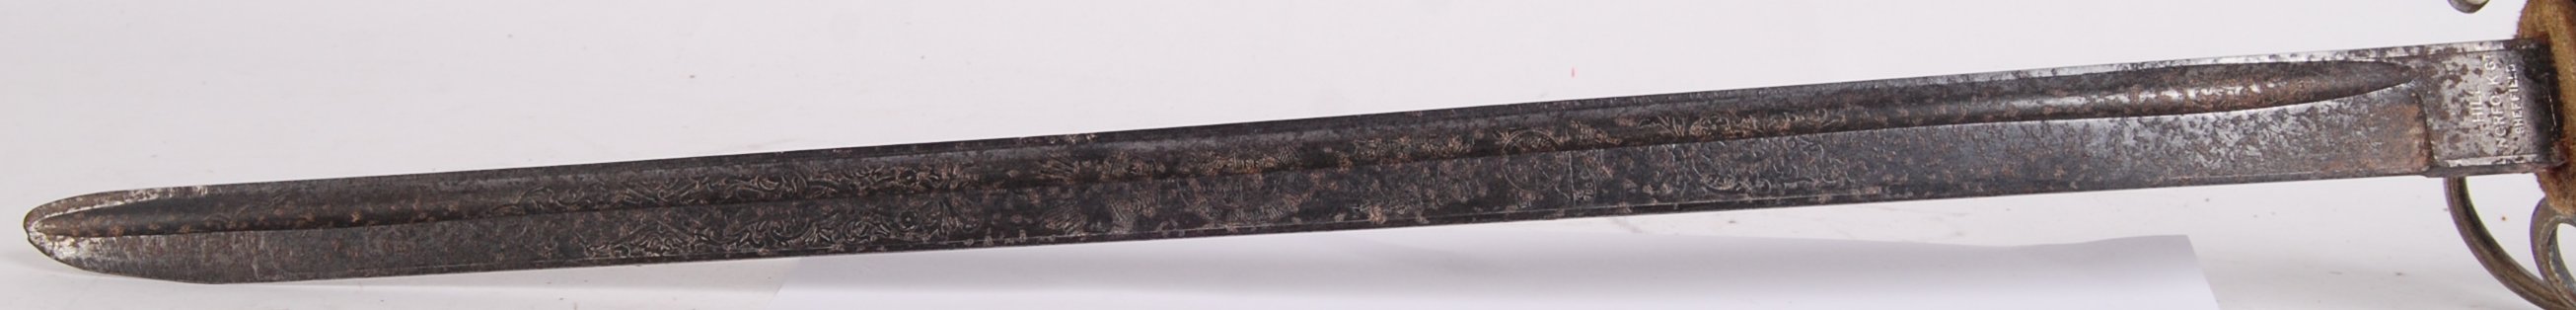 VICTORIAN OFFICERS SWORD - Image 3 of 6